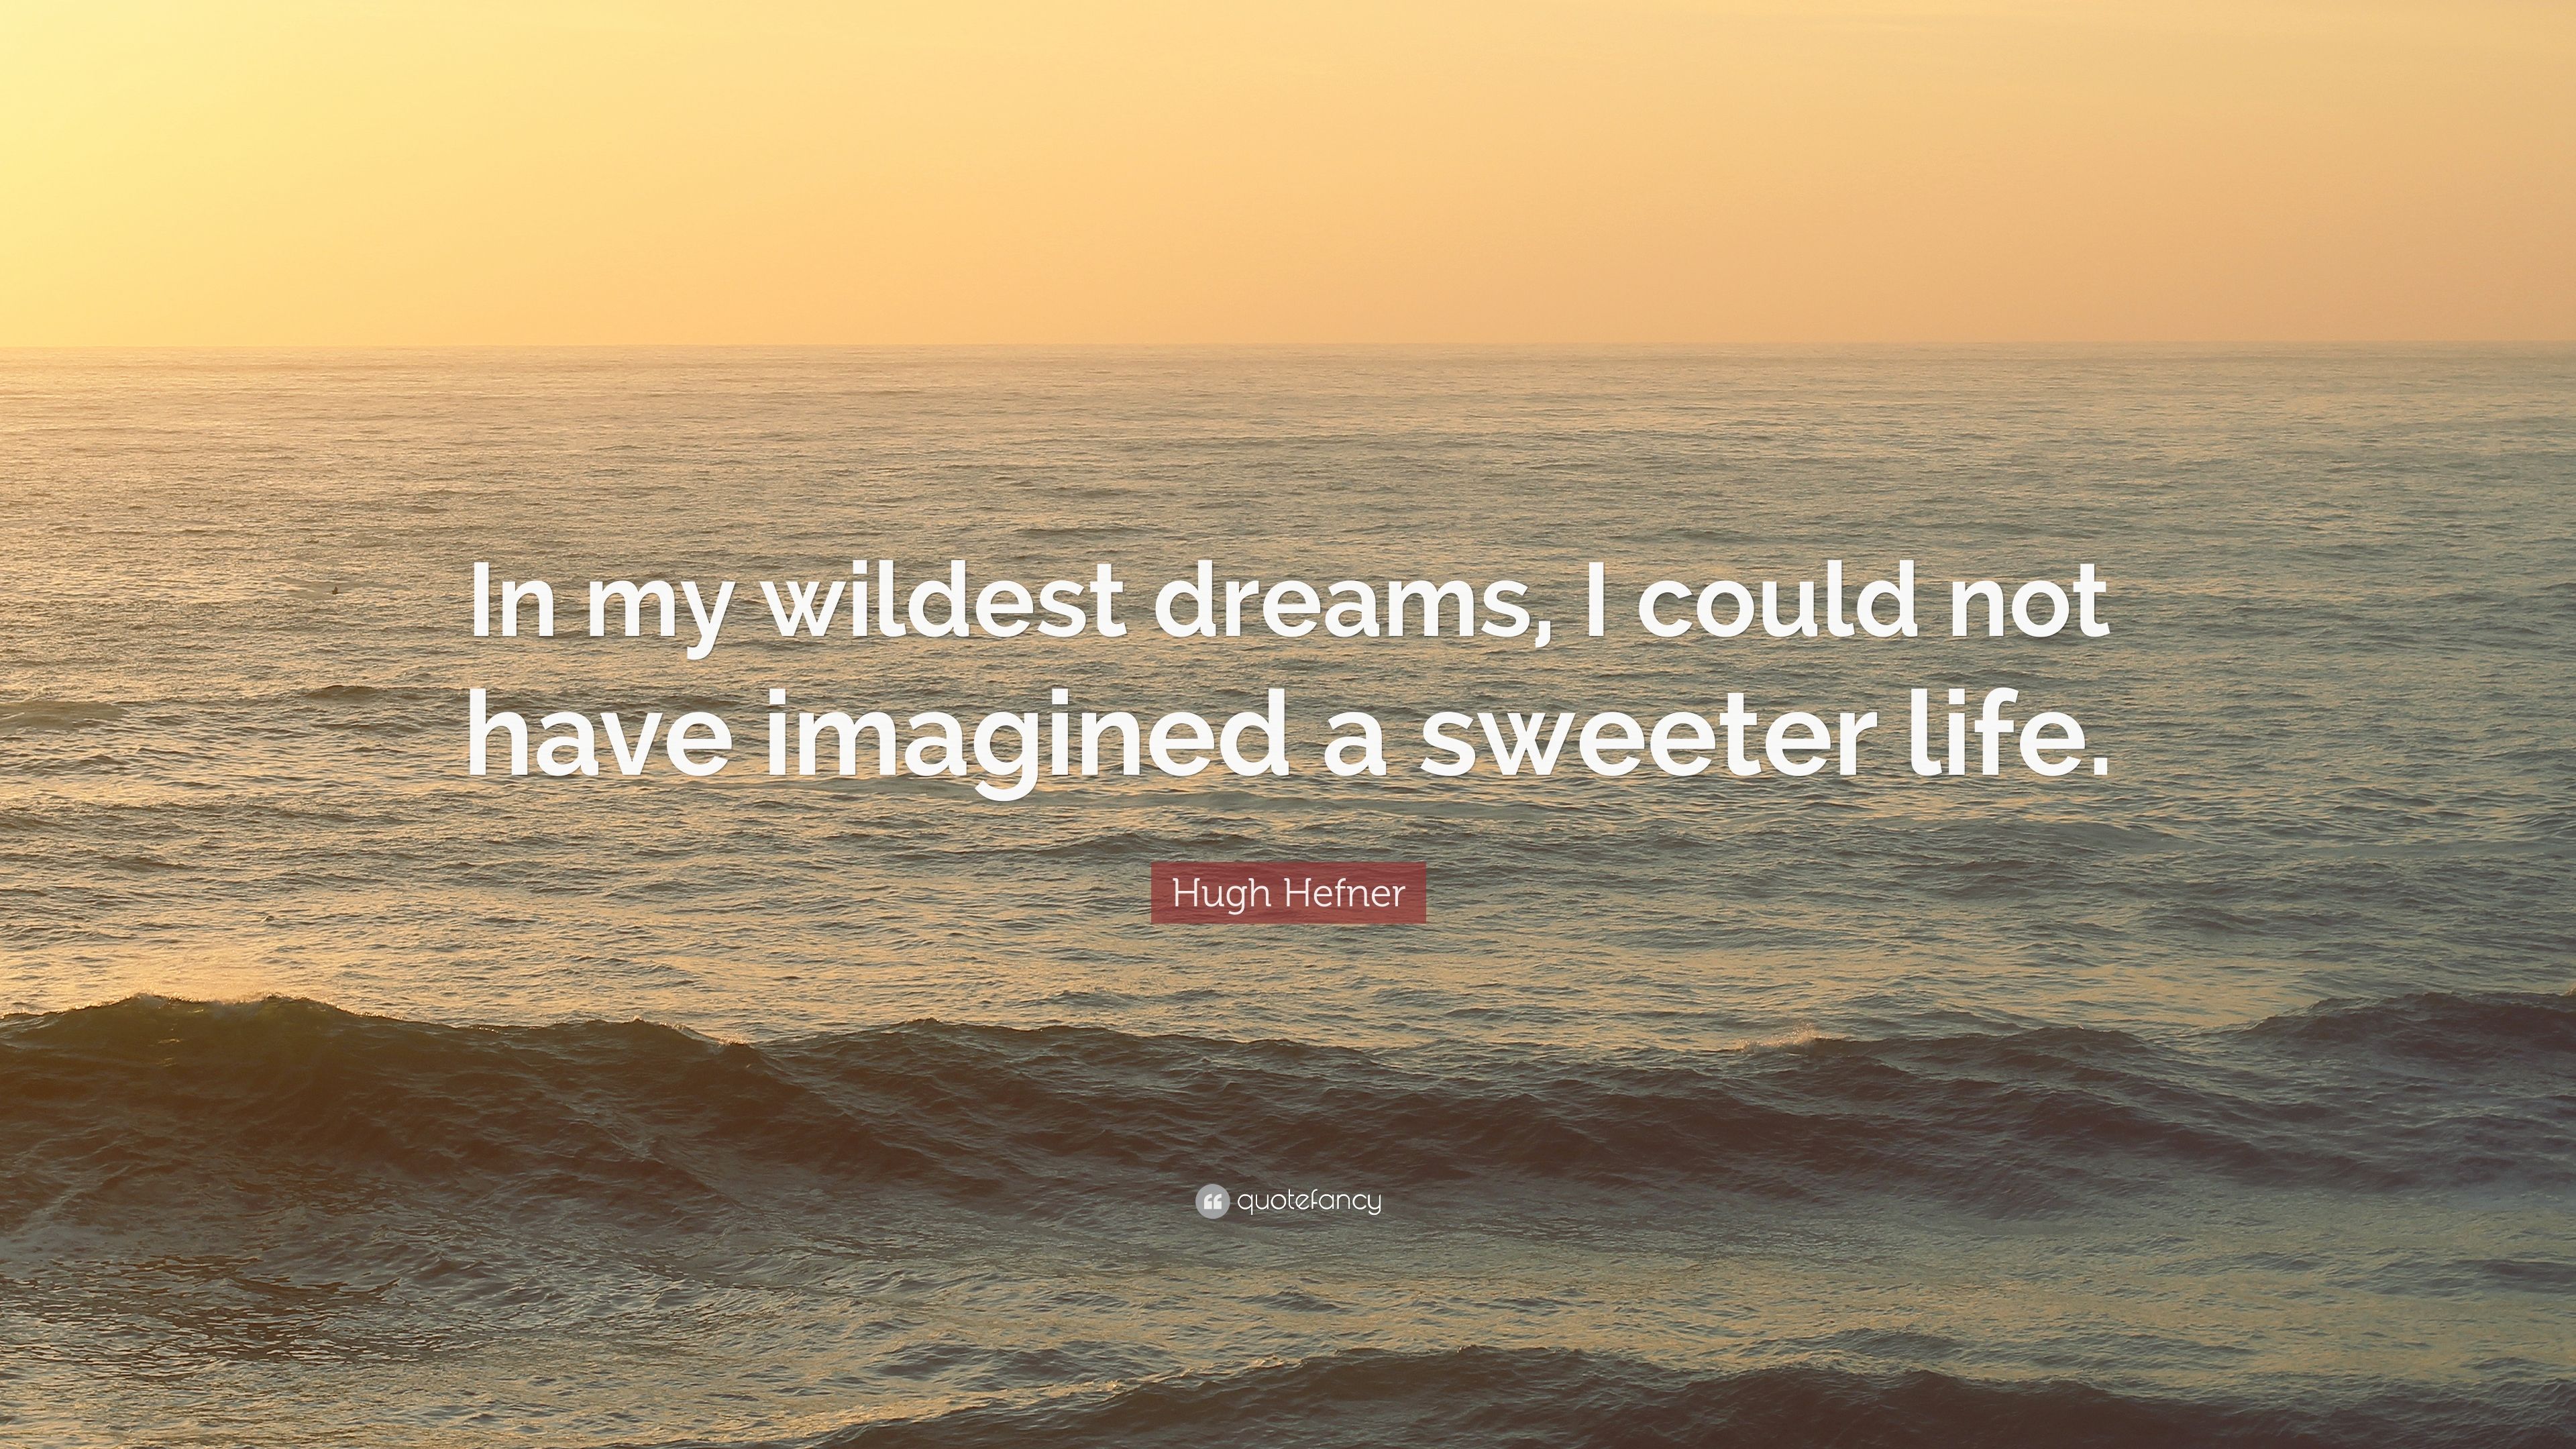 Hugh Hefner Quote: “In my wildest dreams, I could not have imagined a sweeter life.” (7 wallpaper)